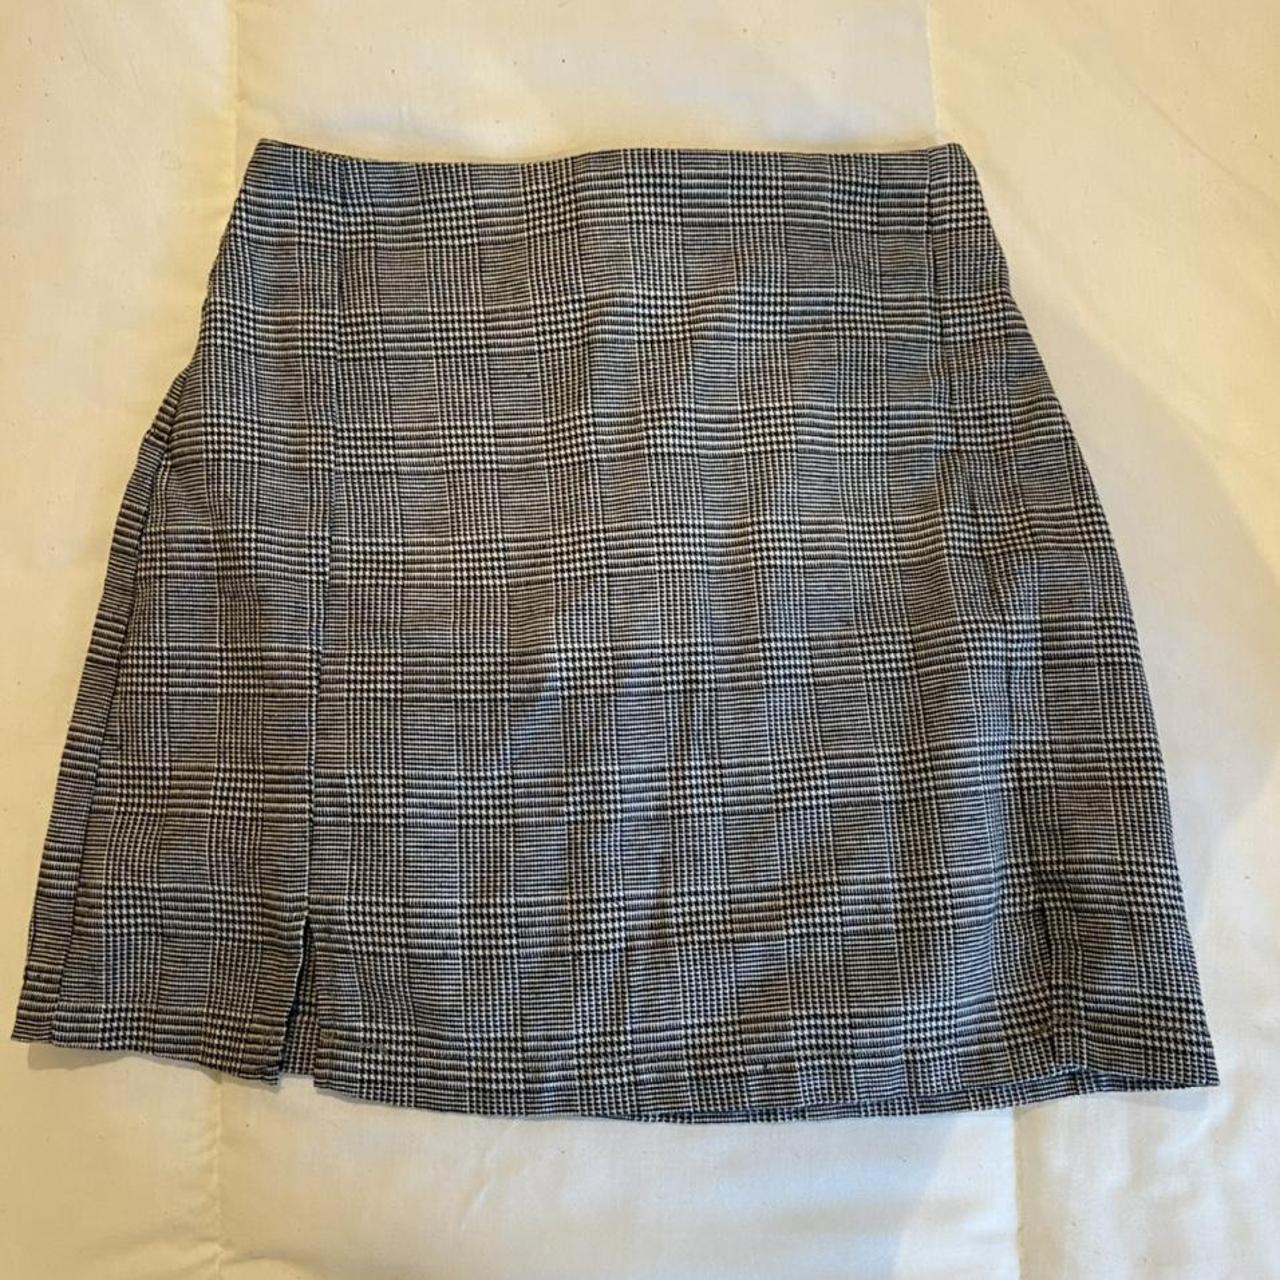 Black and white checkered/striped skirt, fits a size... - Depop